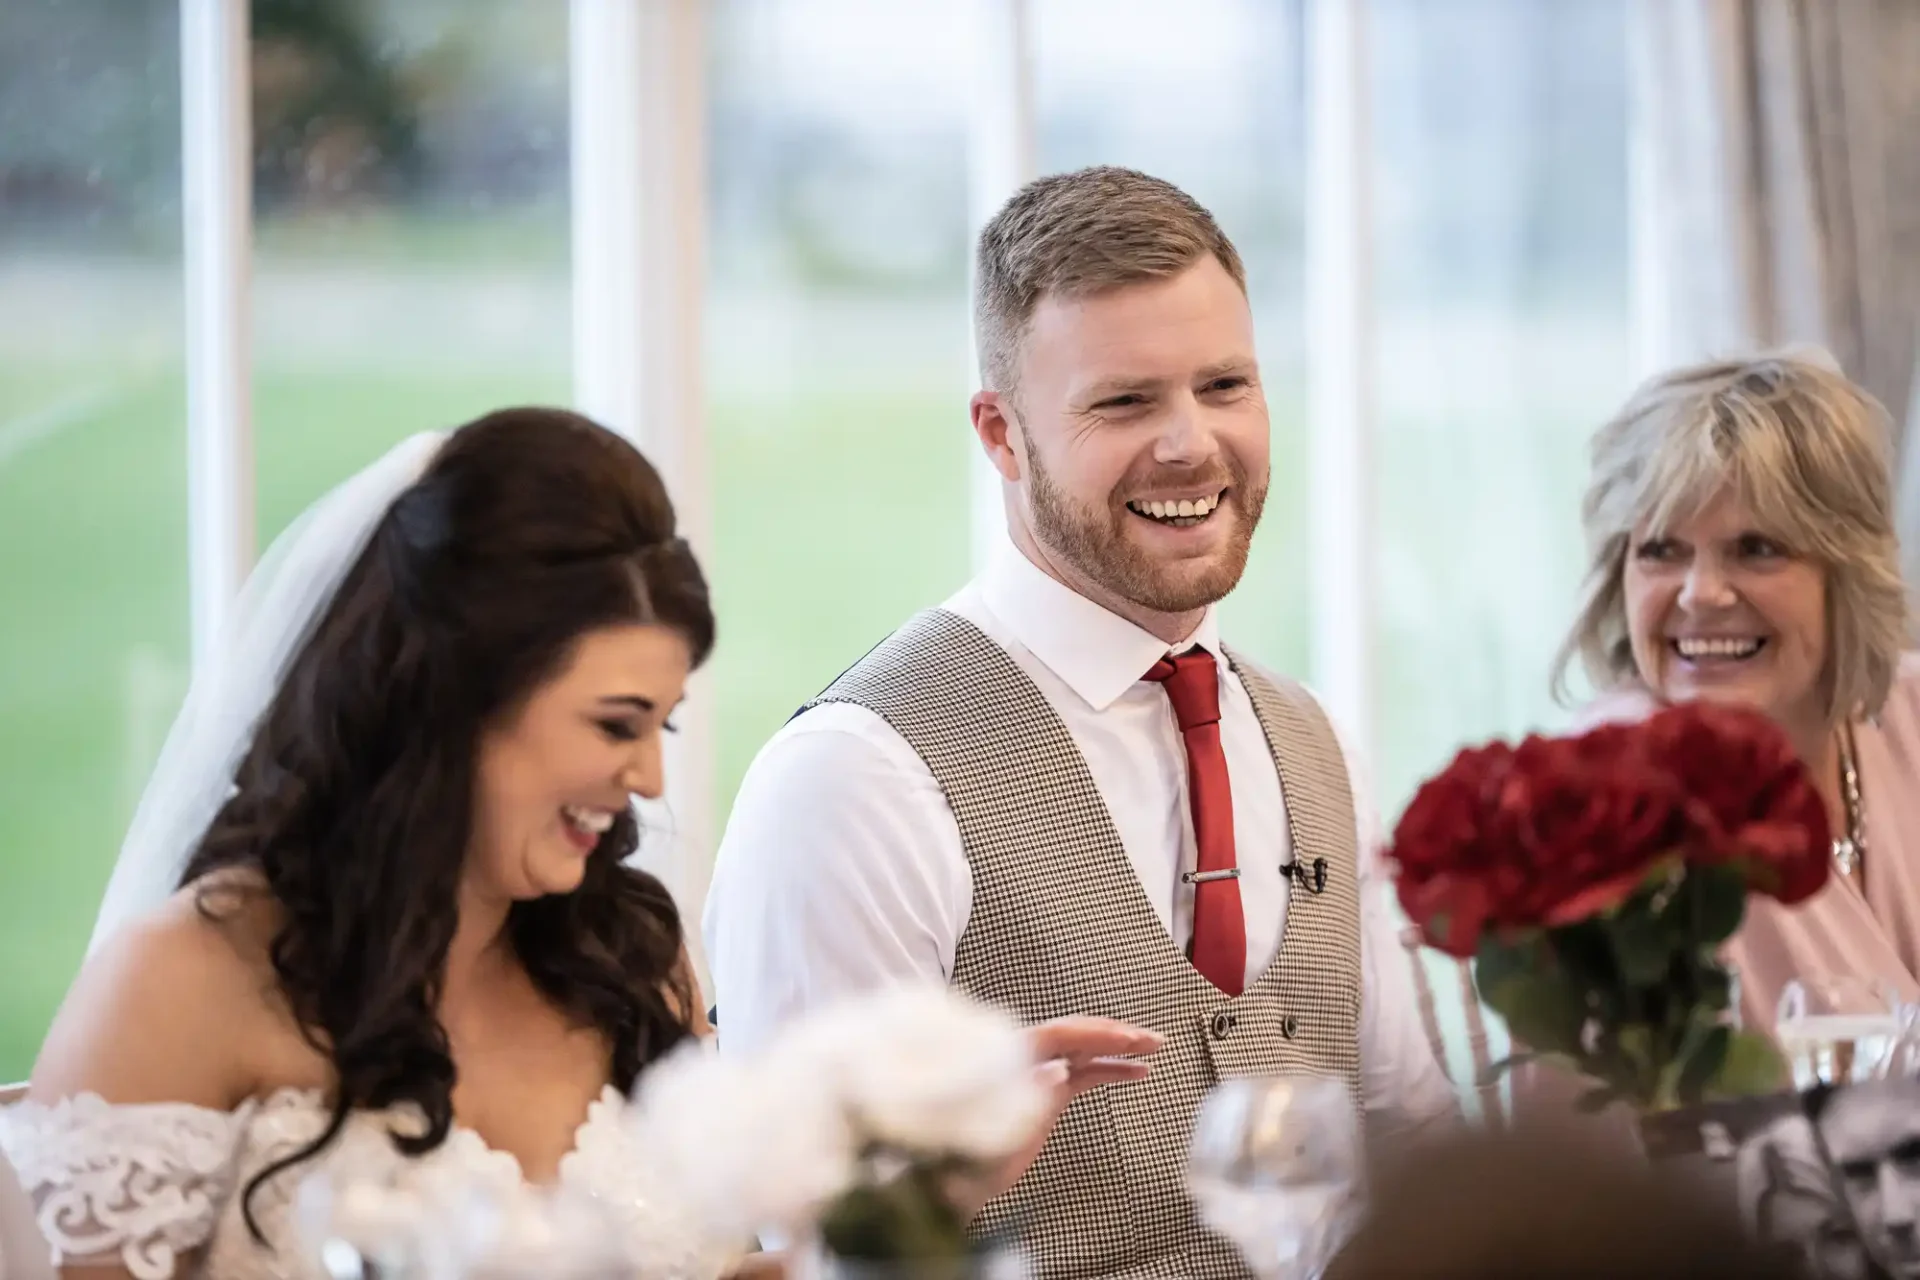 A groom in a tweed vest laughs jovially at a wedding table with a bride in a lace dress and an older woman smiling nearby, with roses and elegant decor around.